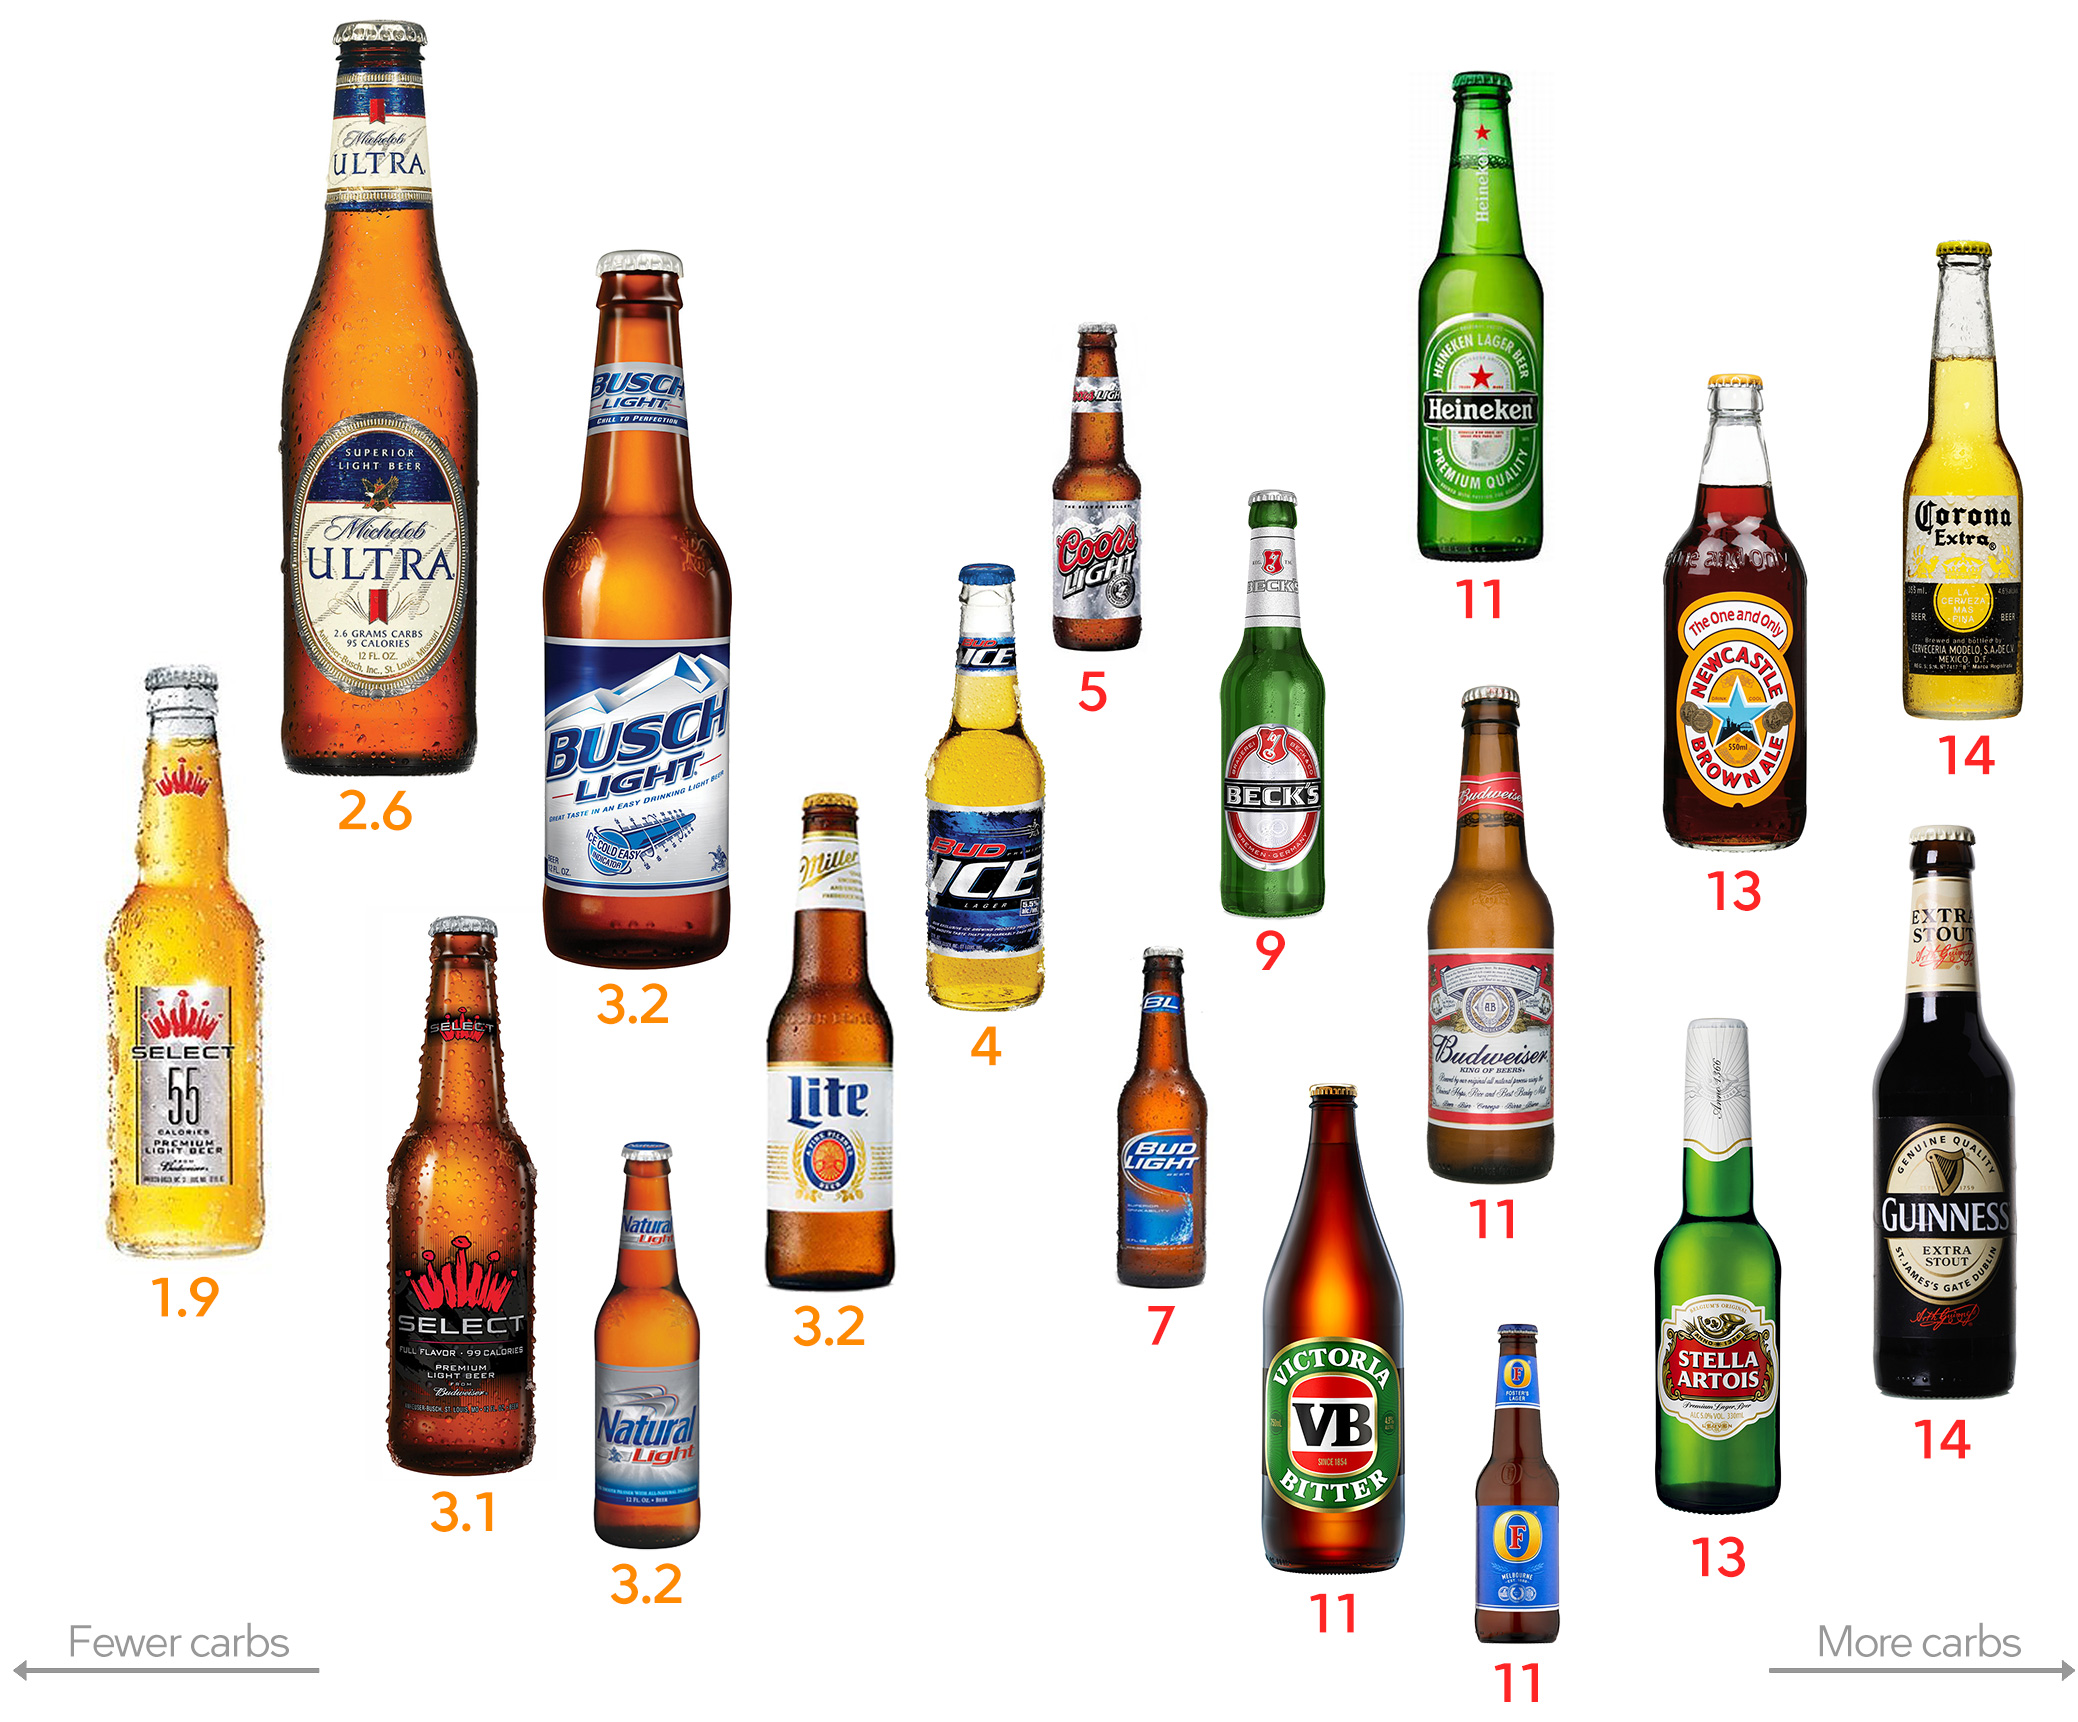 Calories In Alcoholic Drinks Chart Uk